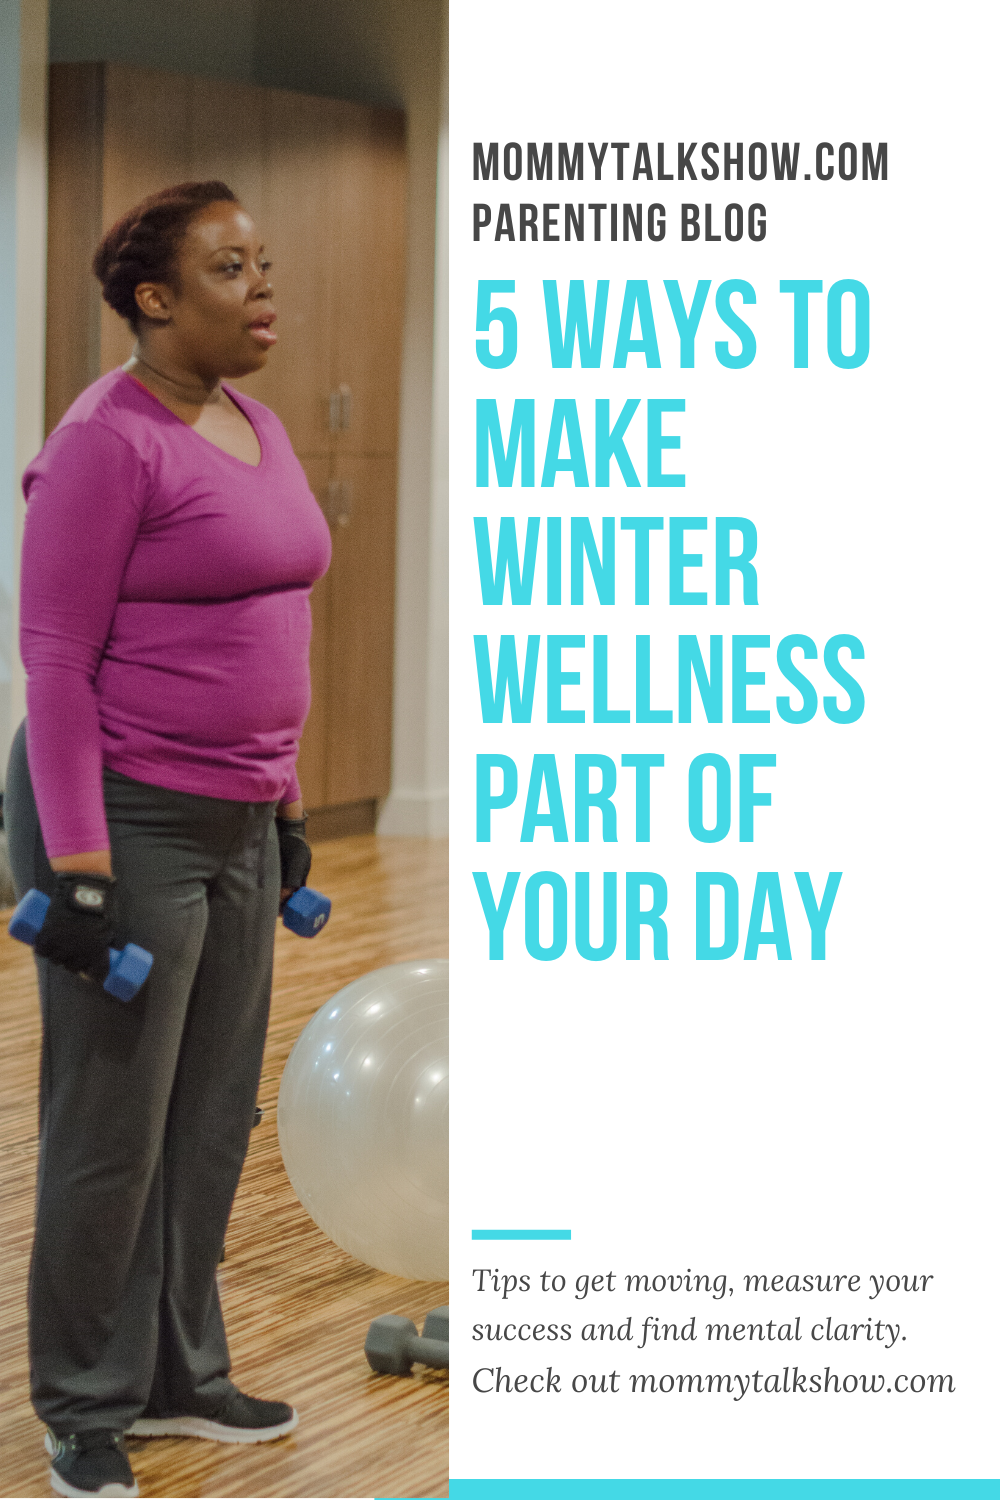 5 Ways to Make Winter Wellness Part of Your Day